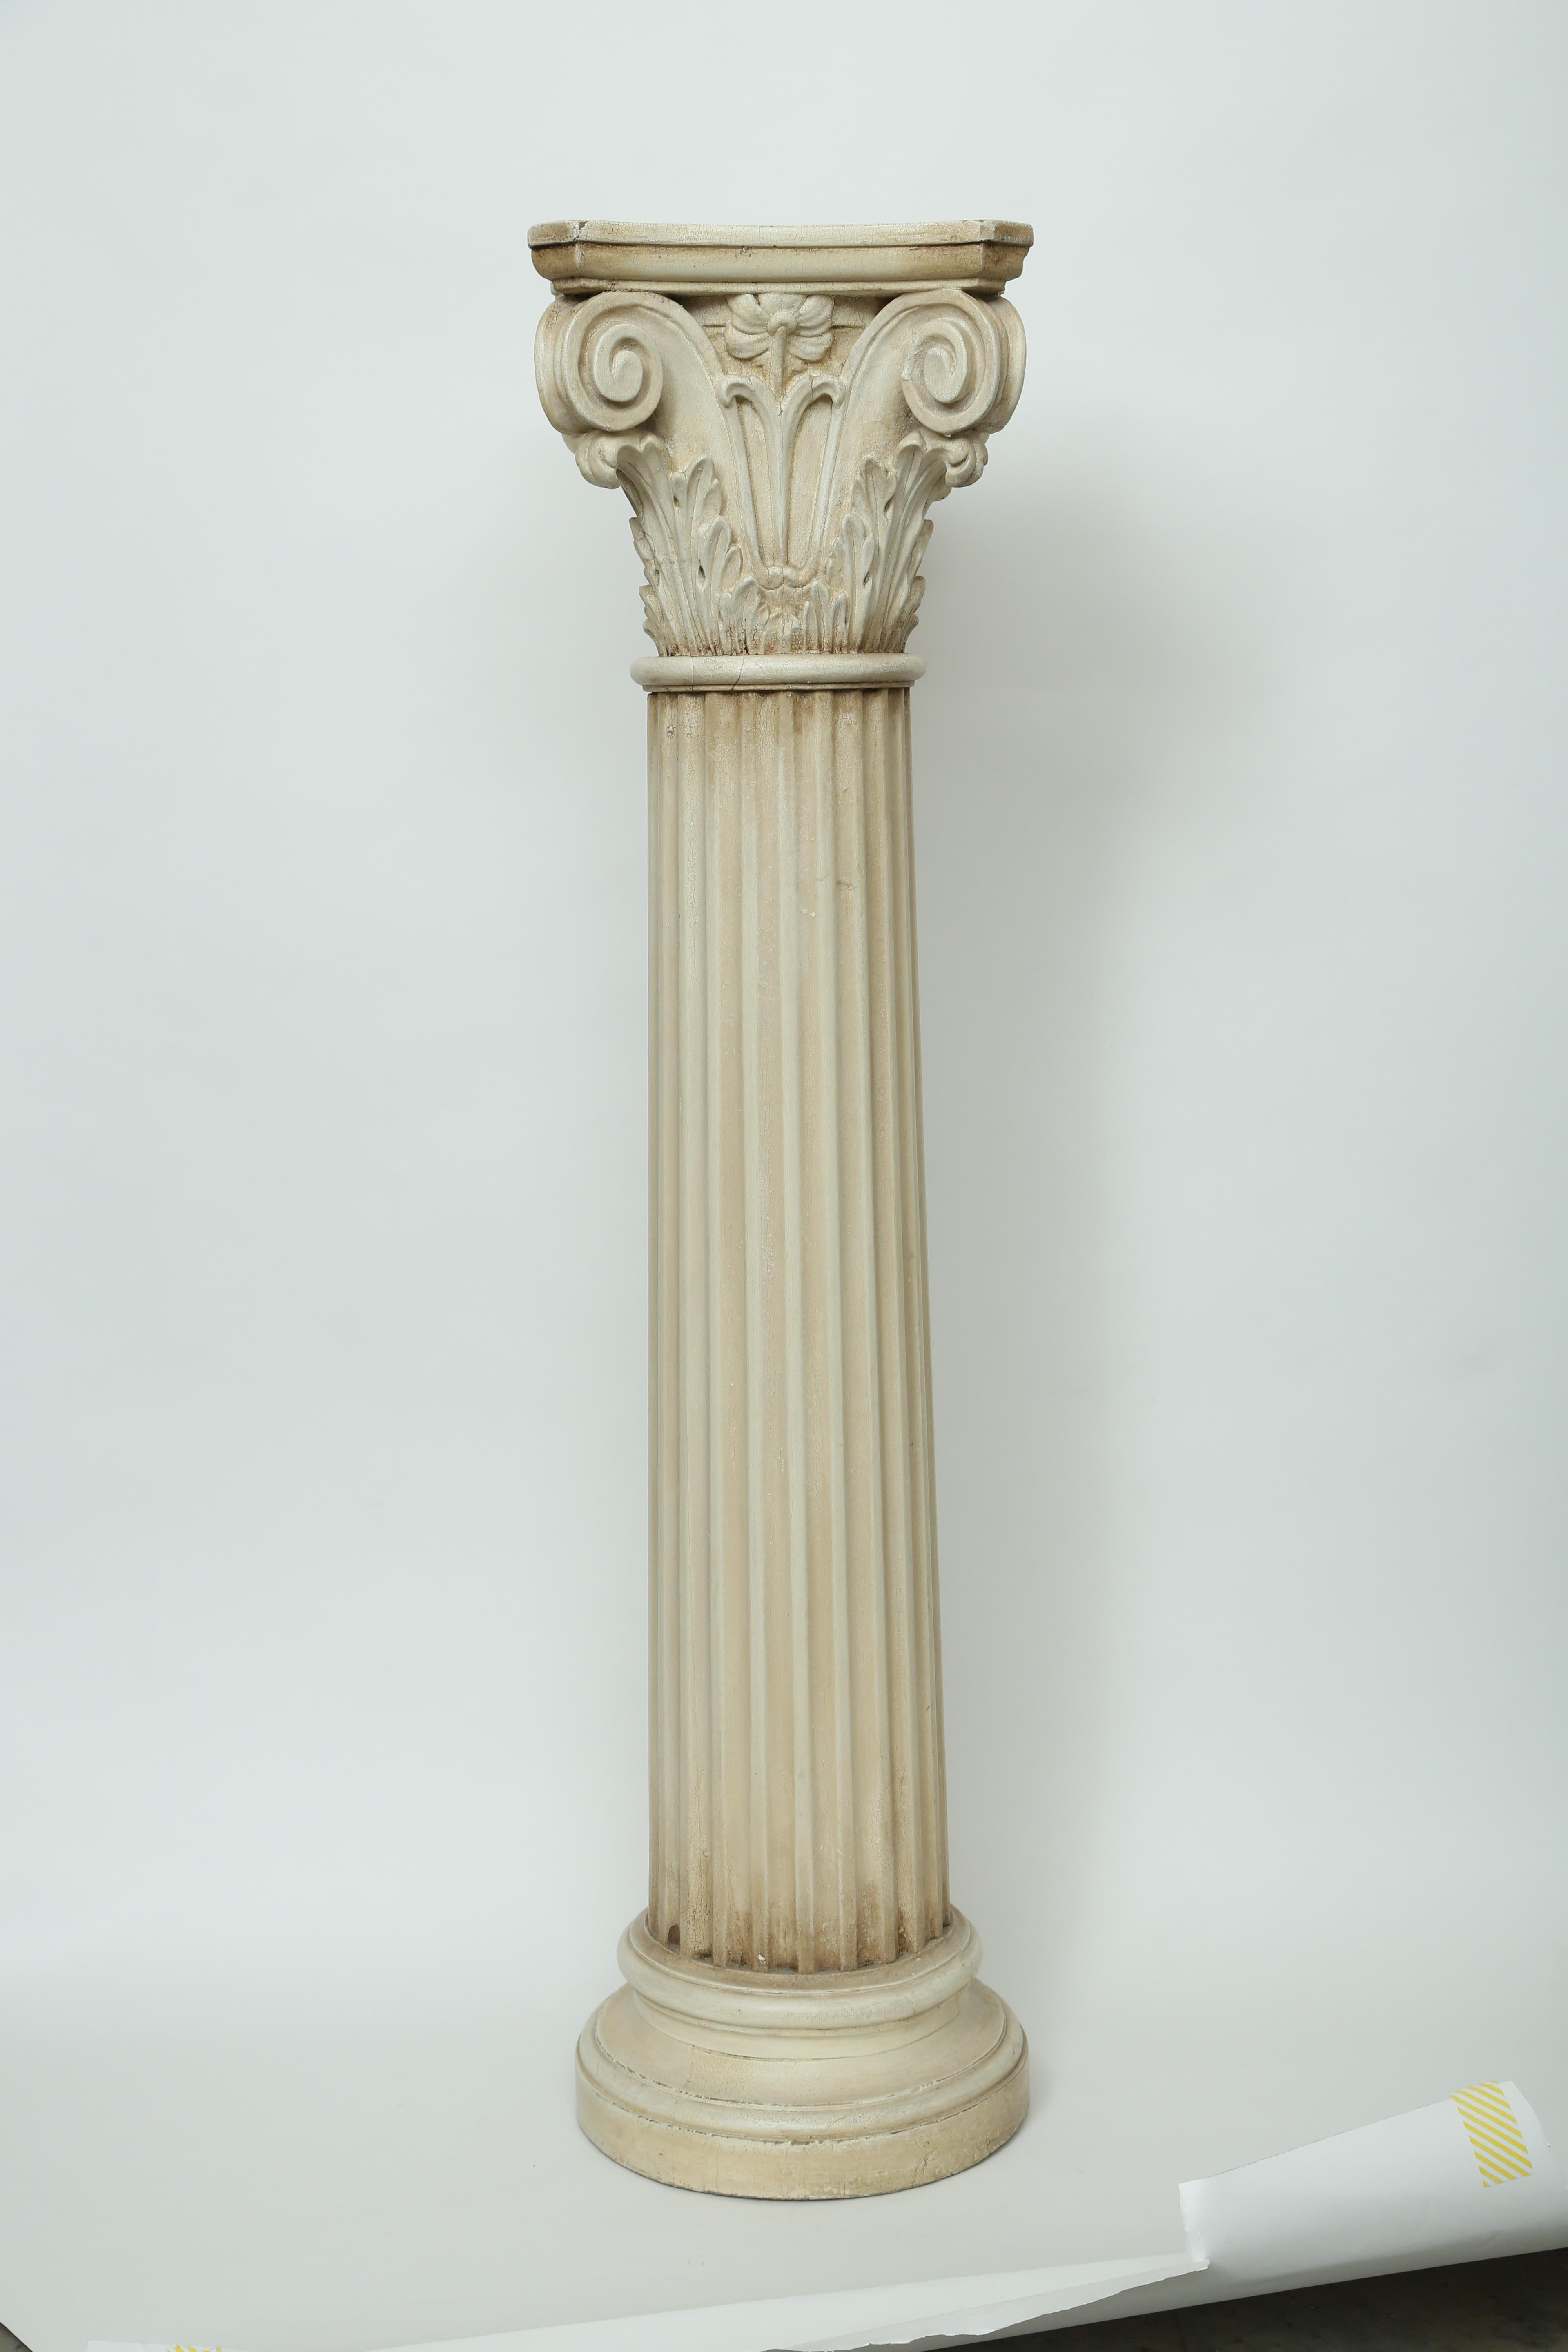 Painted 19th century Corinthian capital wood pedestal. The Corinthian capital has a cut corner top placed on a fluted column all of which sits on a turned round base.